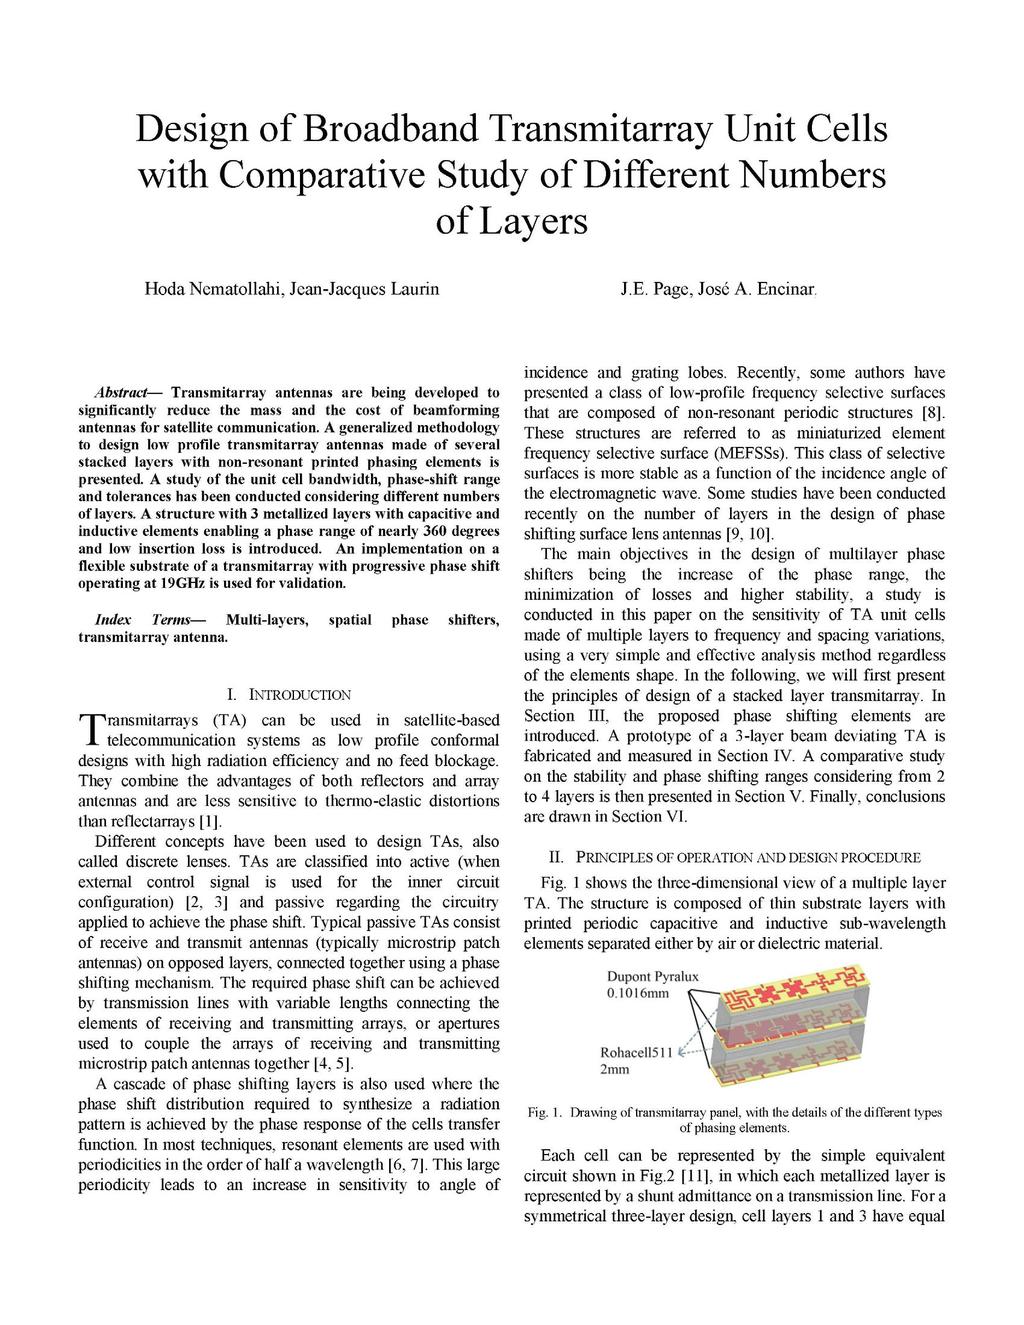 Design of Broadband Transmitarray Unit Cells with Comparative Study of Different Numbers of Layers Hoda Nematollahi, Jean-Jacques Laurin J.E. Page, José A. Encinar.